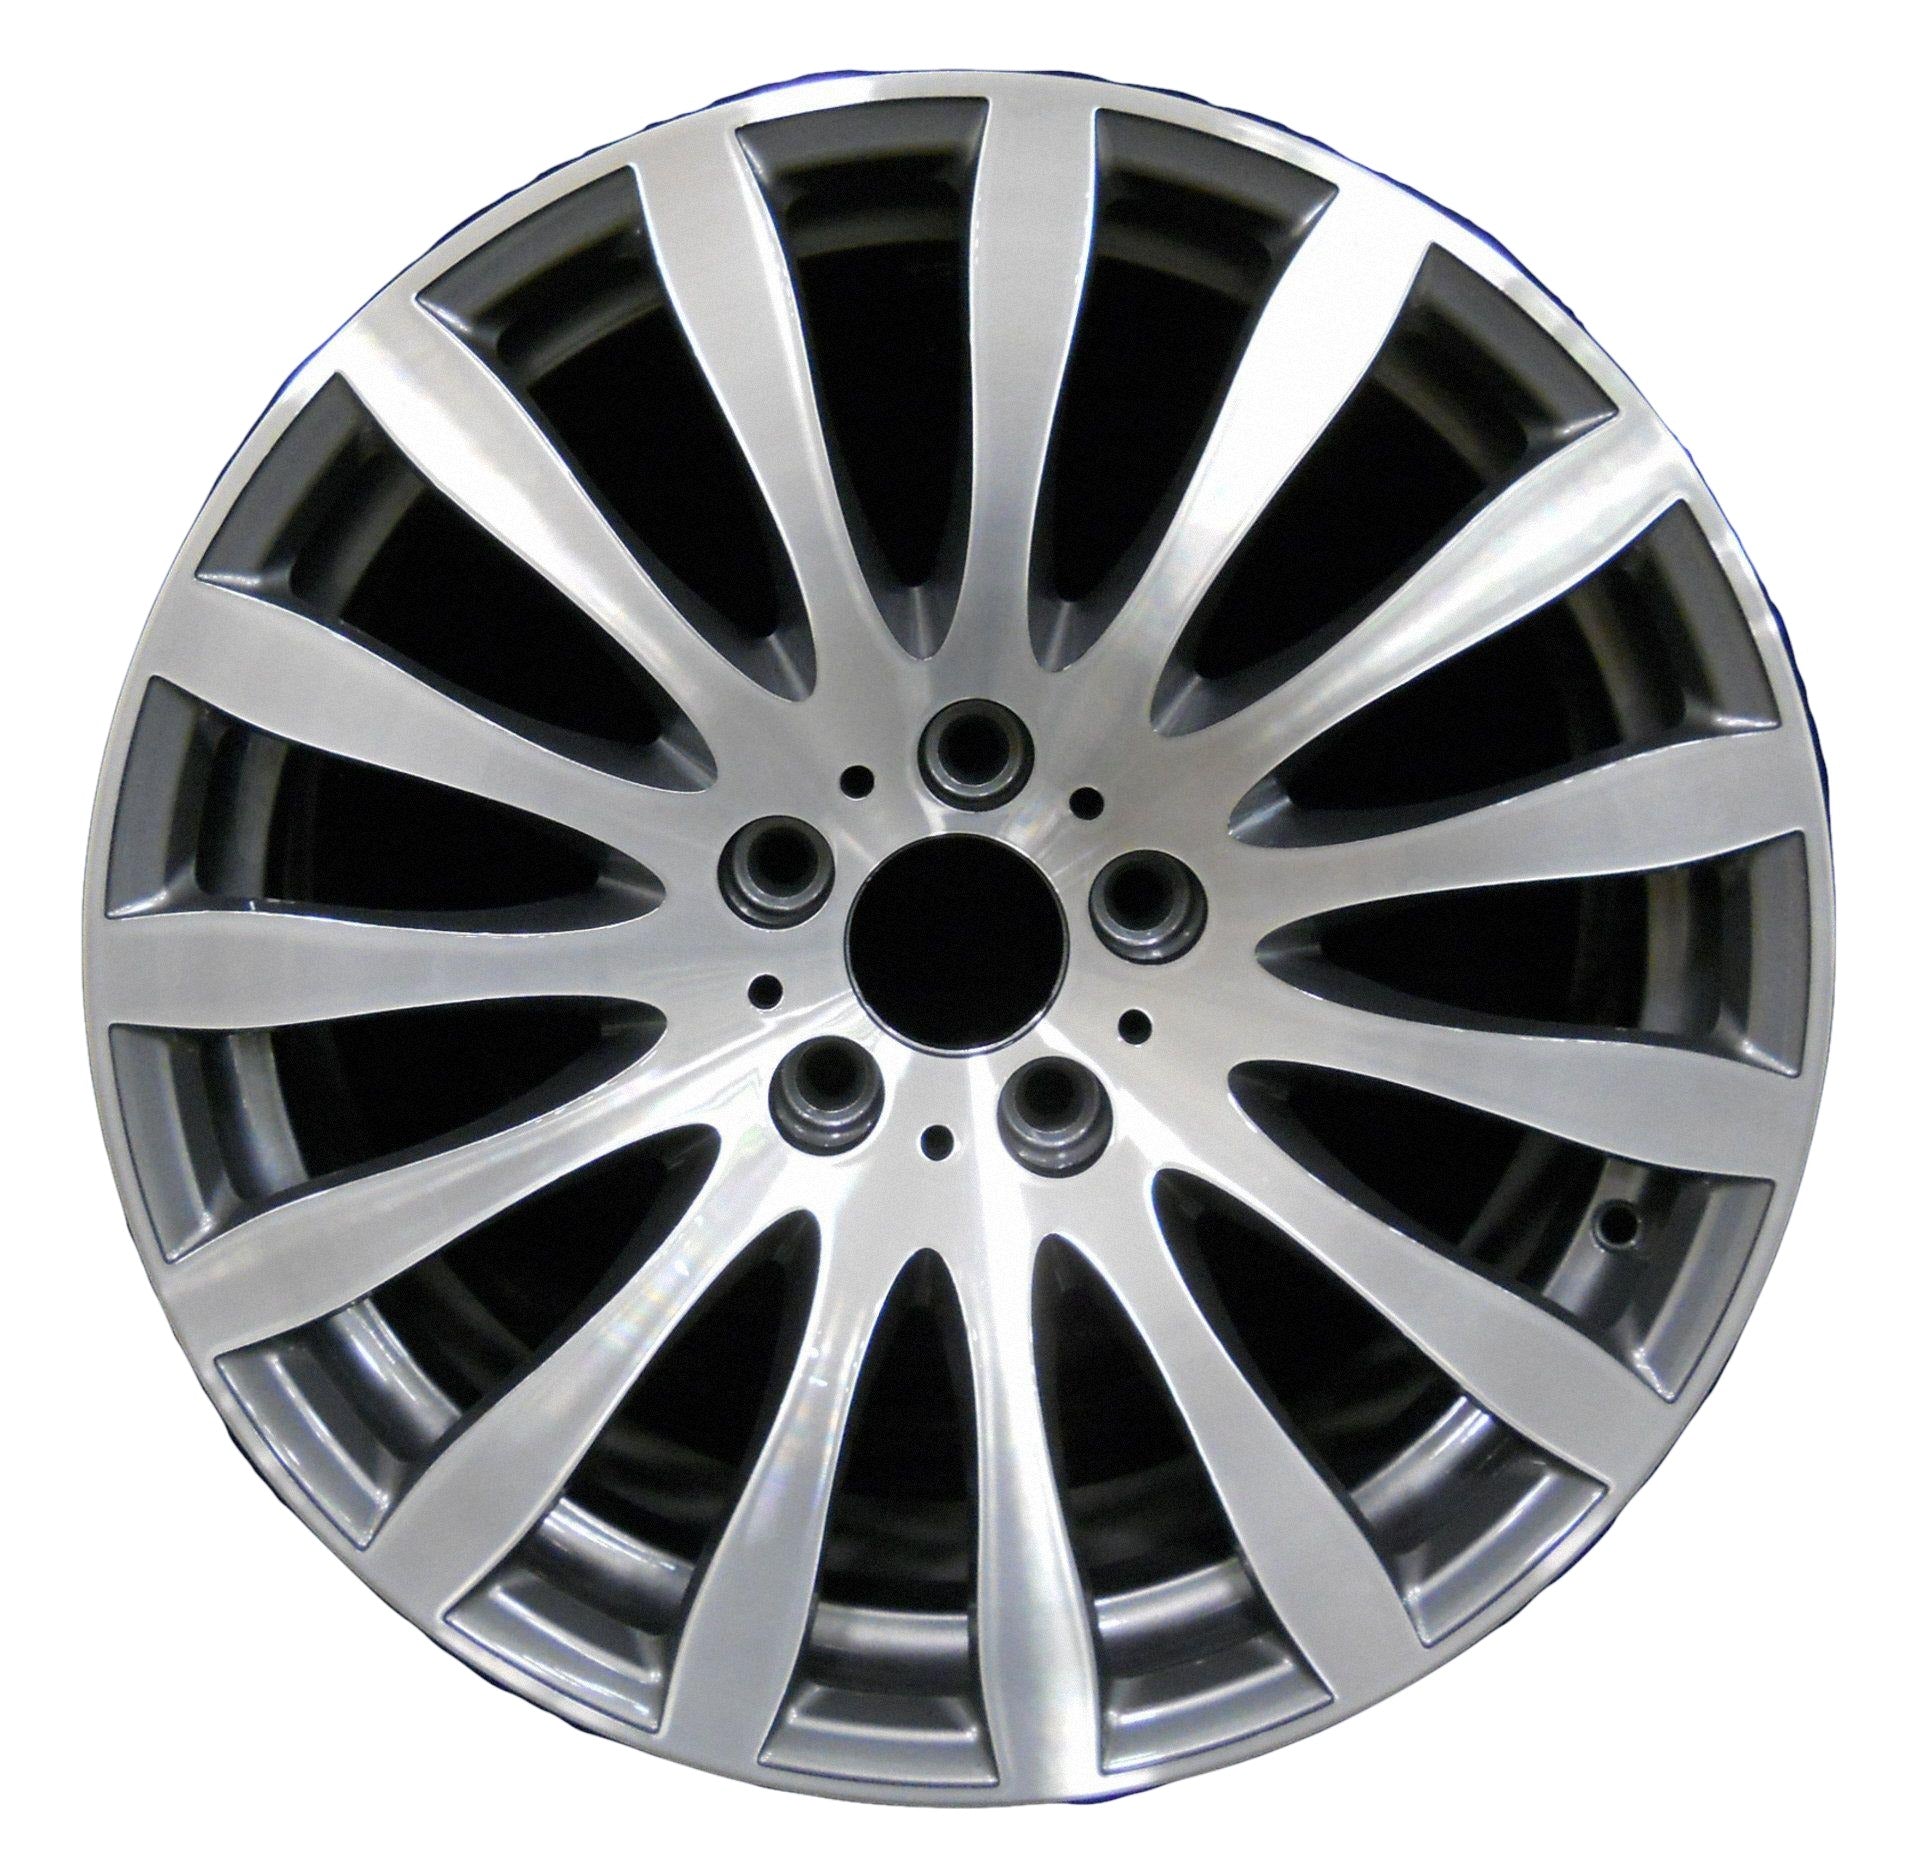 BMW 328i  2007, 2008, 2009, 2010, 2011, 2012, 2013 Factory OEM Car Wheel Size 19x9 Alloy WAO.59627RE.LC37.MABRT